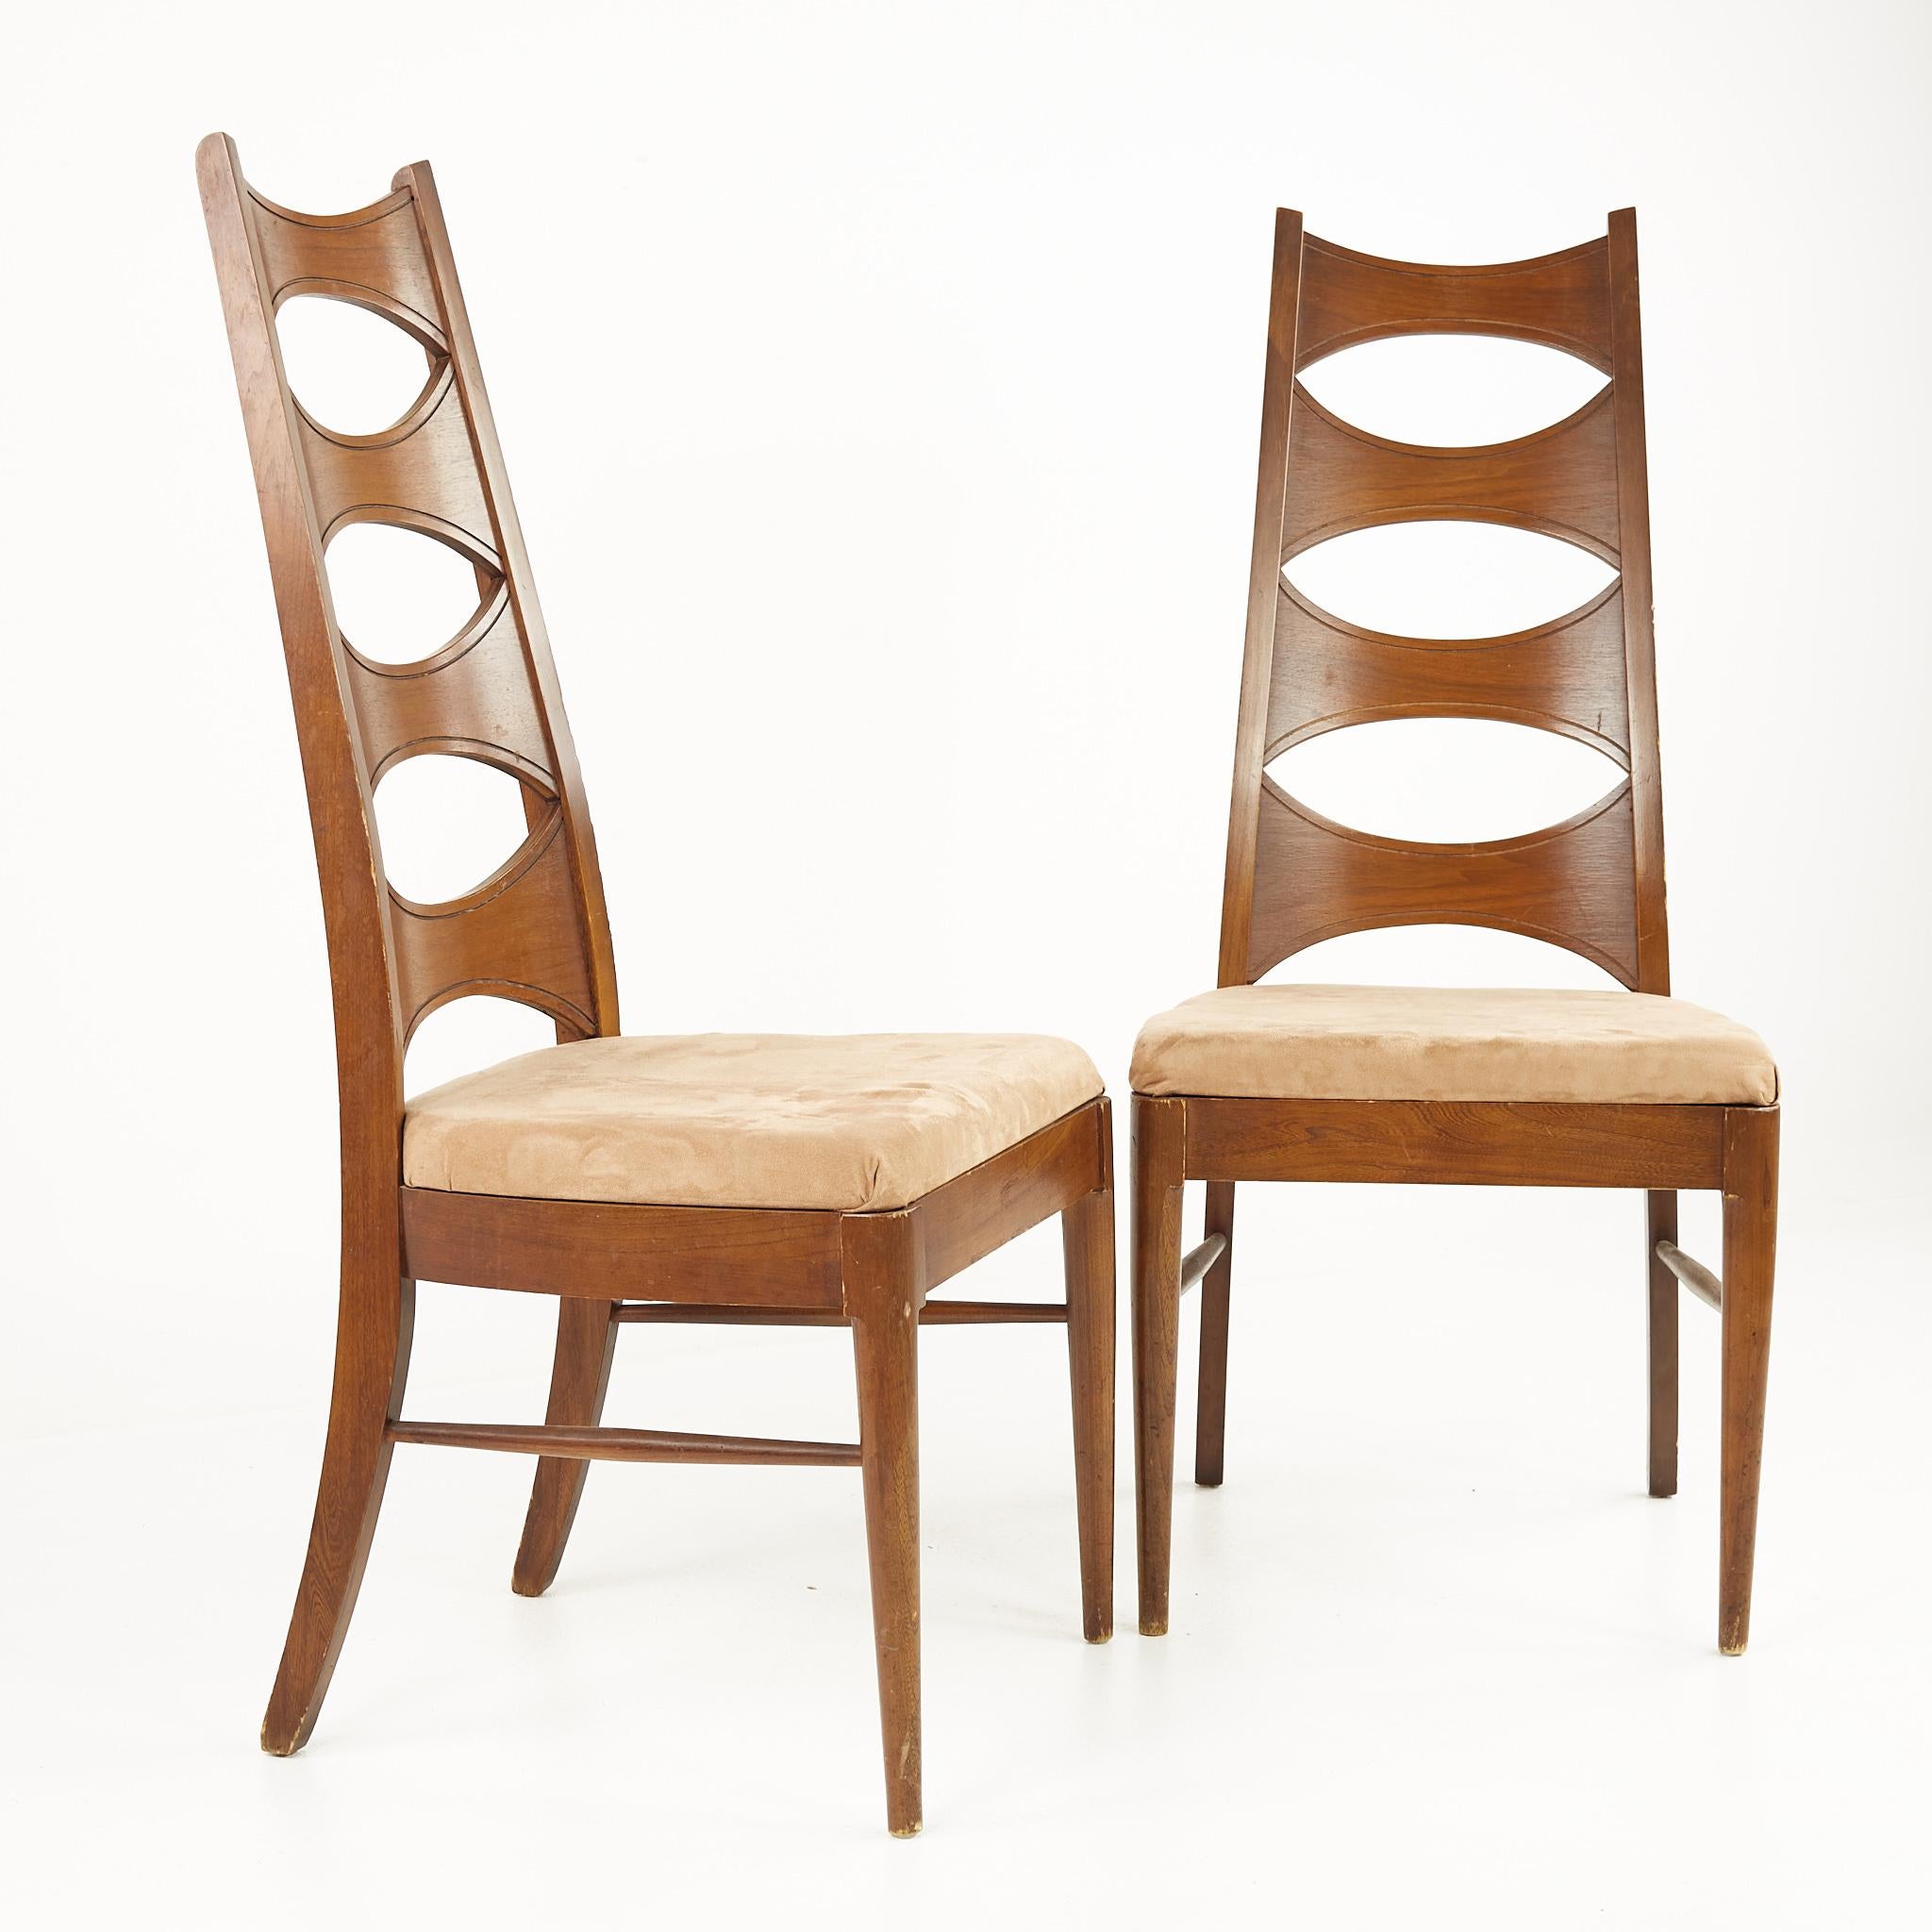 Late 20th Century Kent Coffey Perspecta Mid Century Cats Eye Walnut Dining Chairs, Set of 12